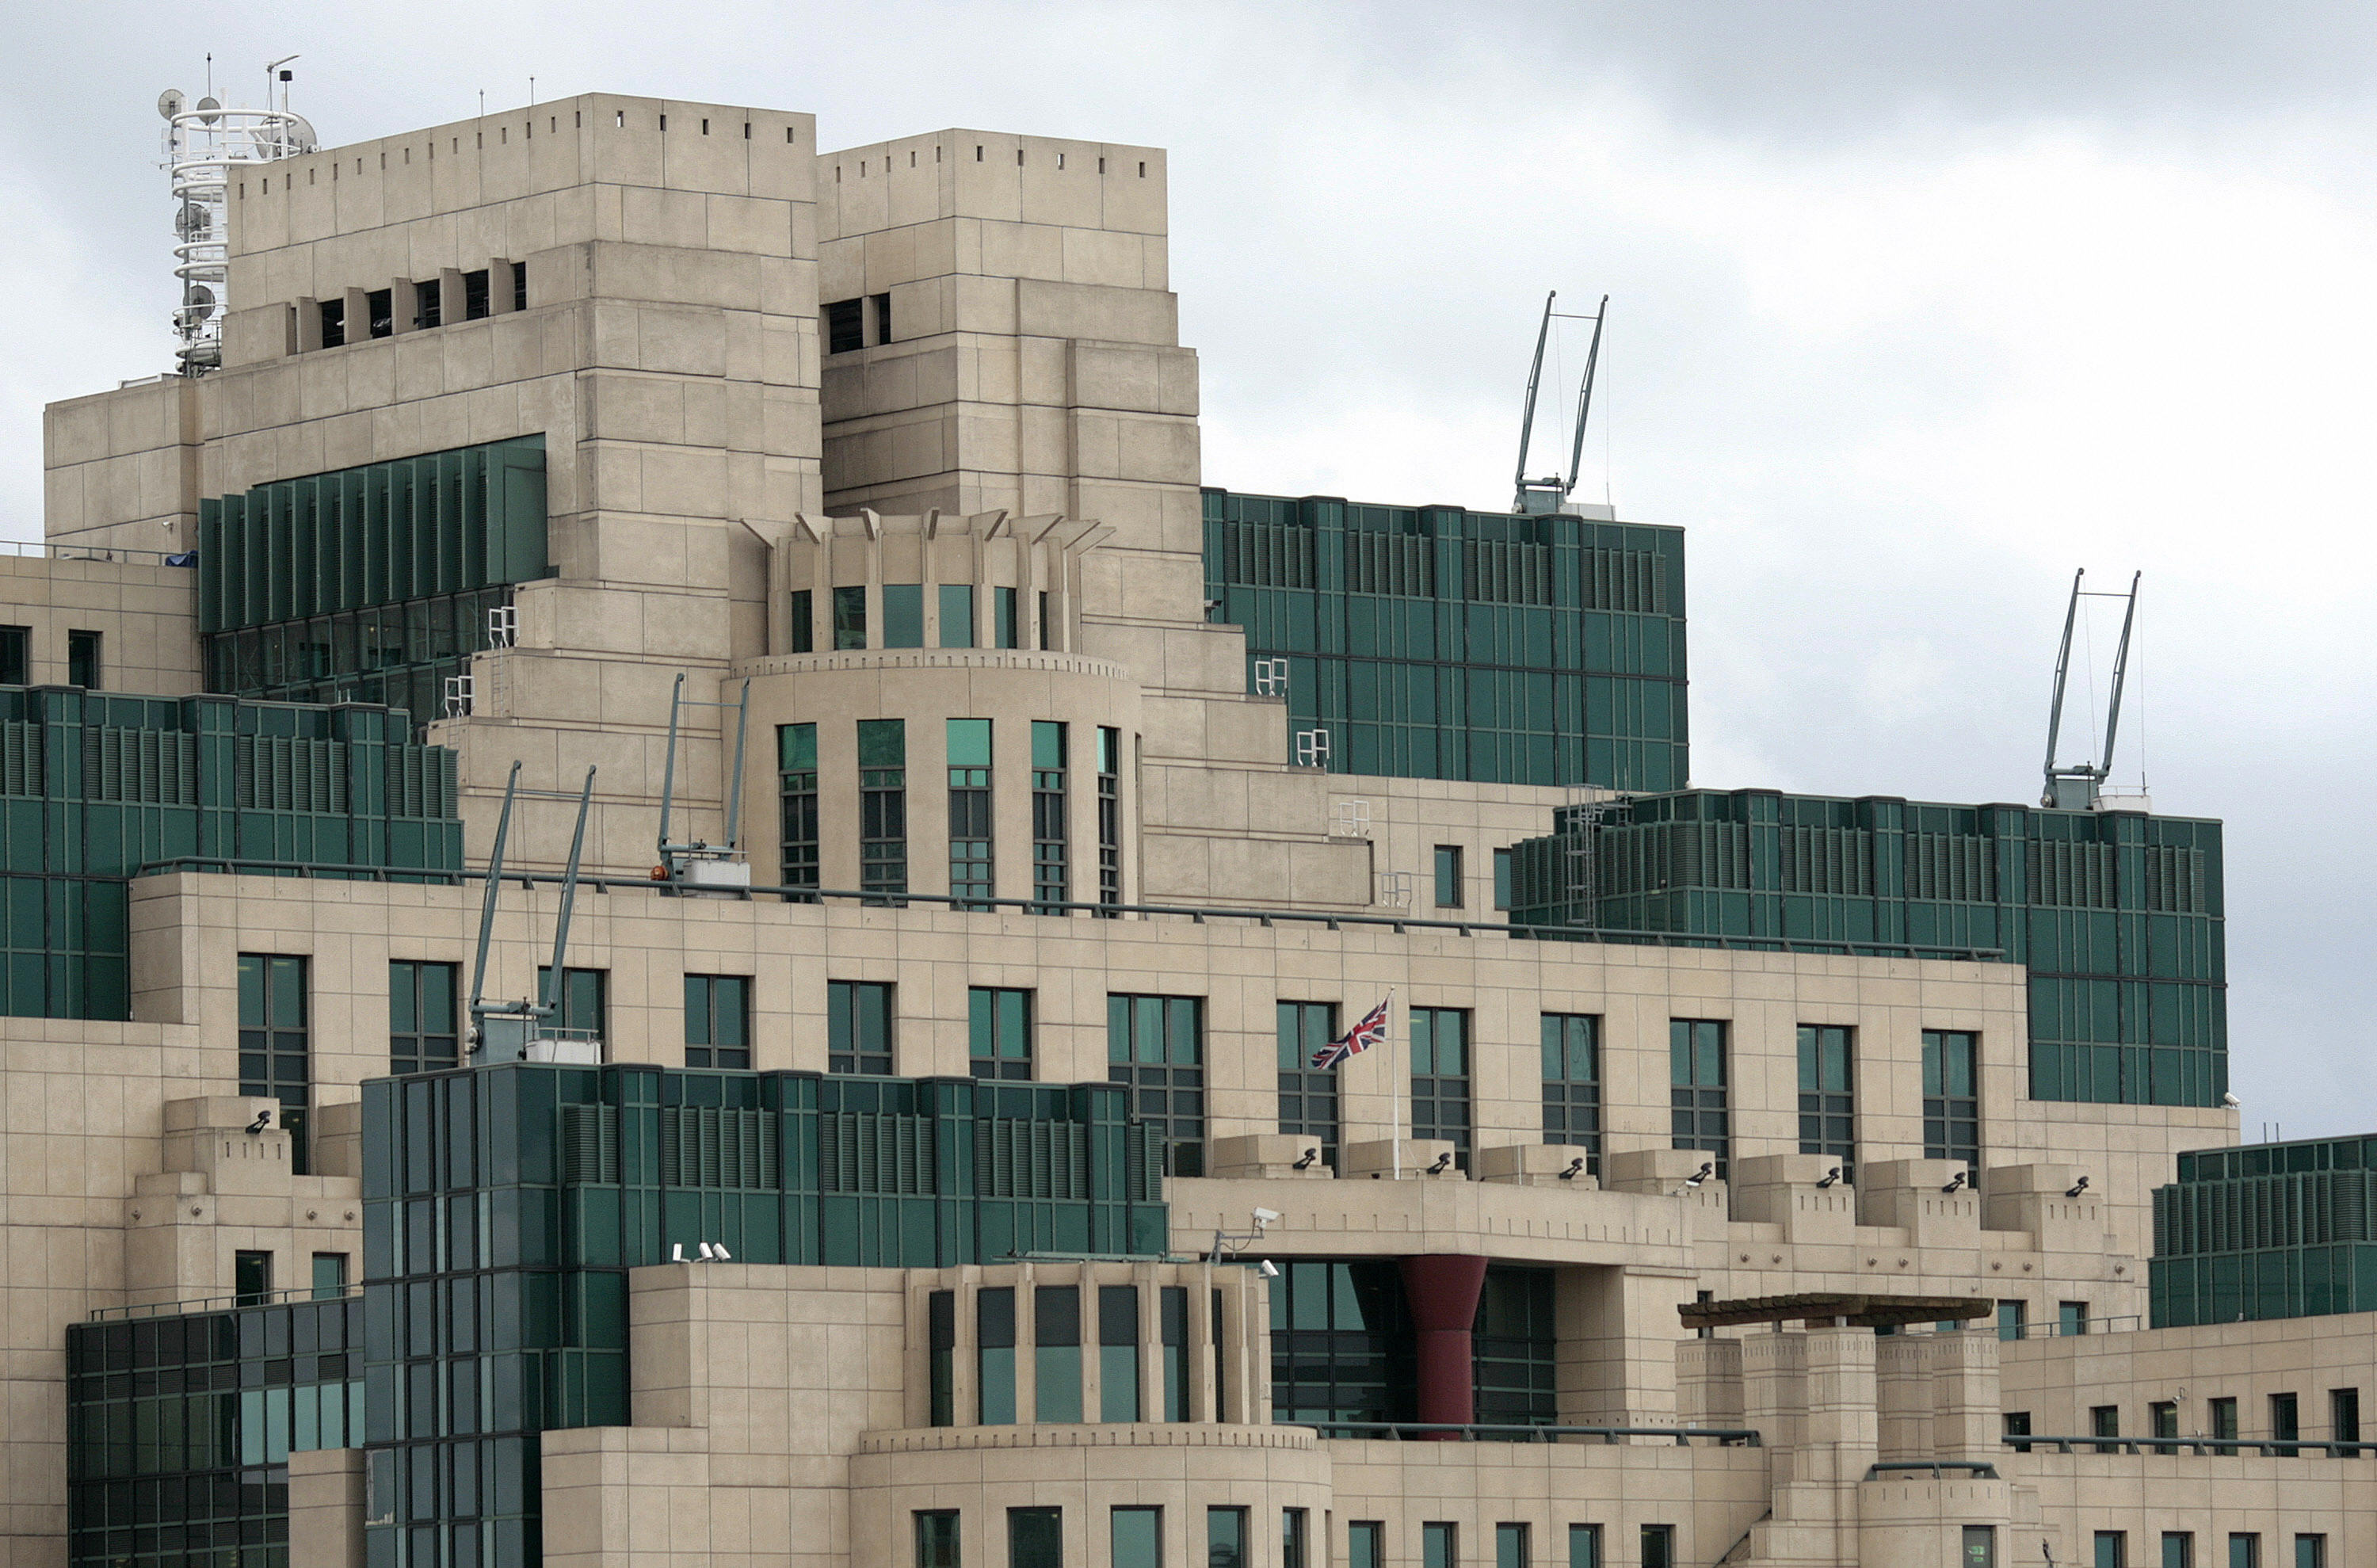 The MI6 building, which is the SIS (The Secret Intelligence Service) headquarter, is pictured at Vauxhall Cross in central London on March 3, 2009. (Shaun Curry—AFP/Getty Images)